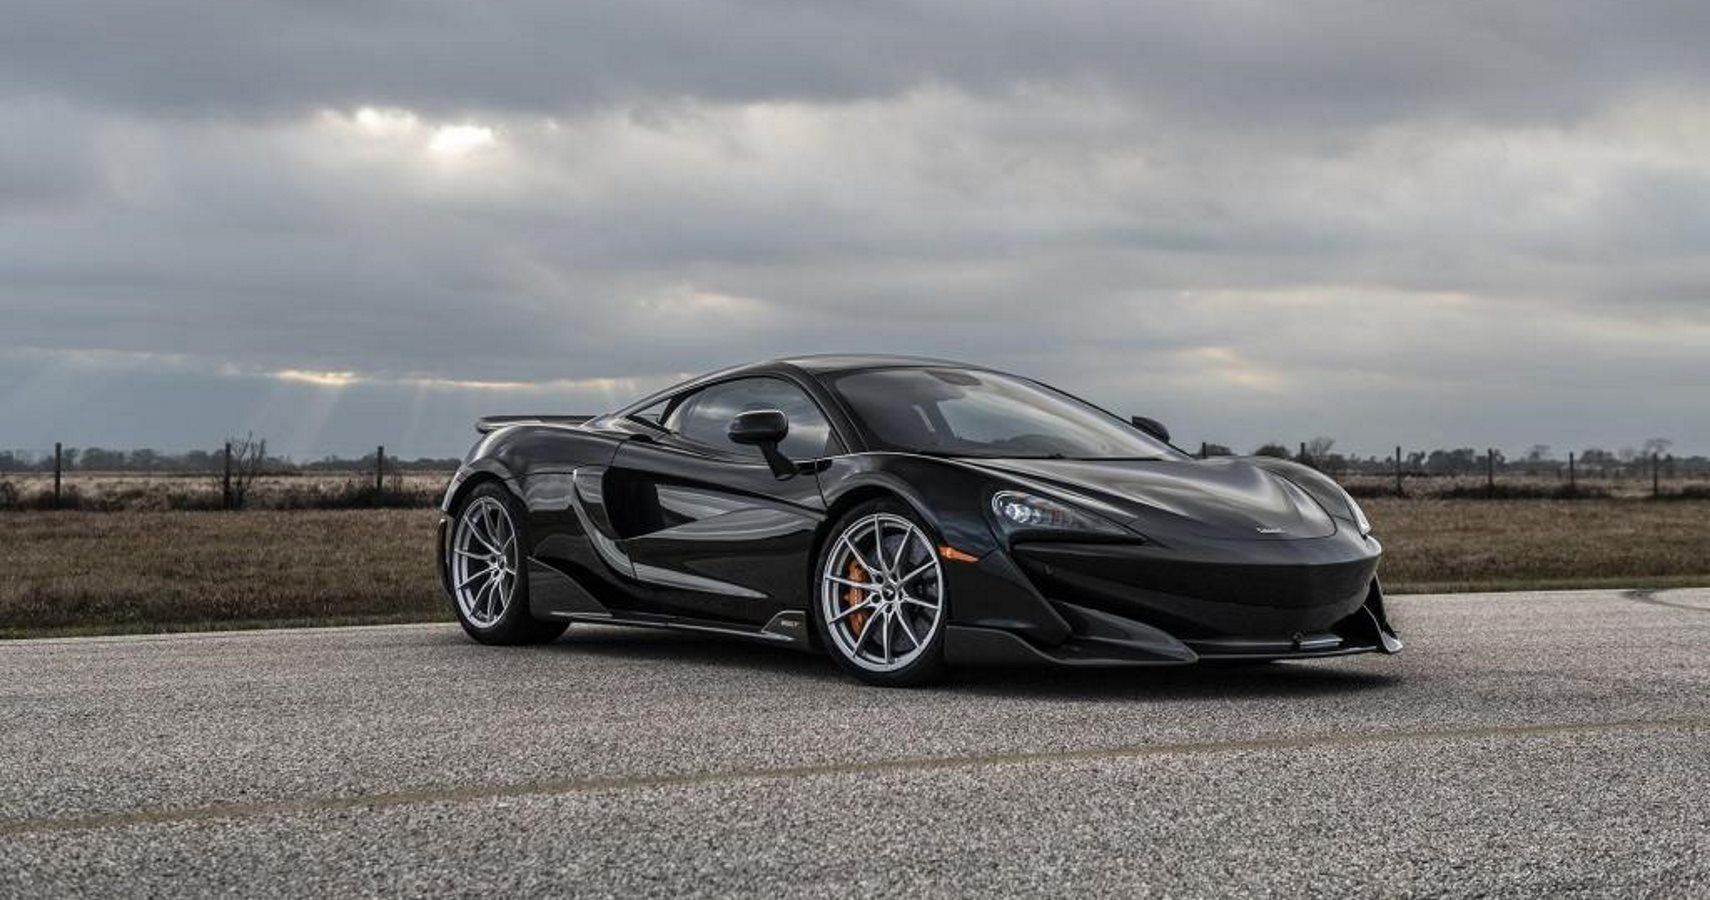 Hennessey Shows McLaren 600LT Baseline Dyno Test In Preparation For Some Serious Upgrades